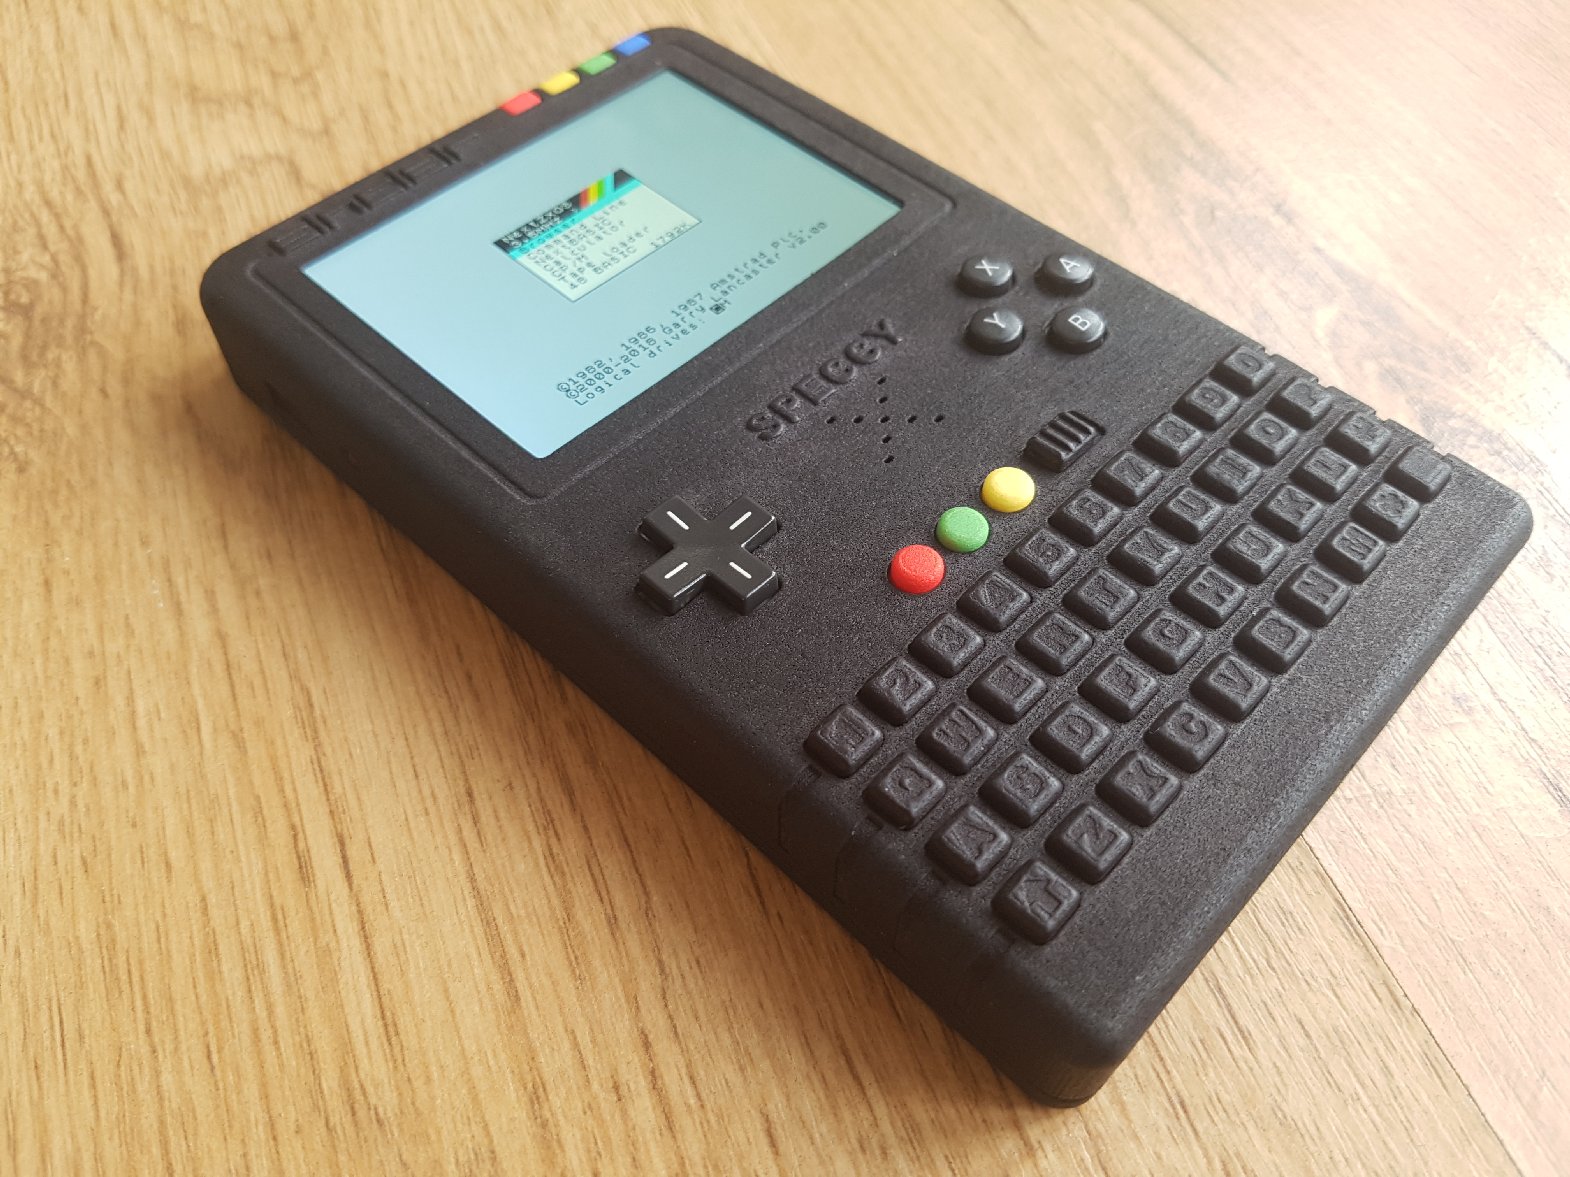 The finished Handheld 3.5